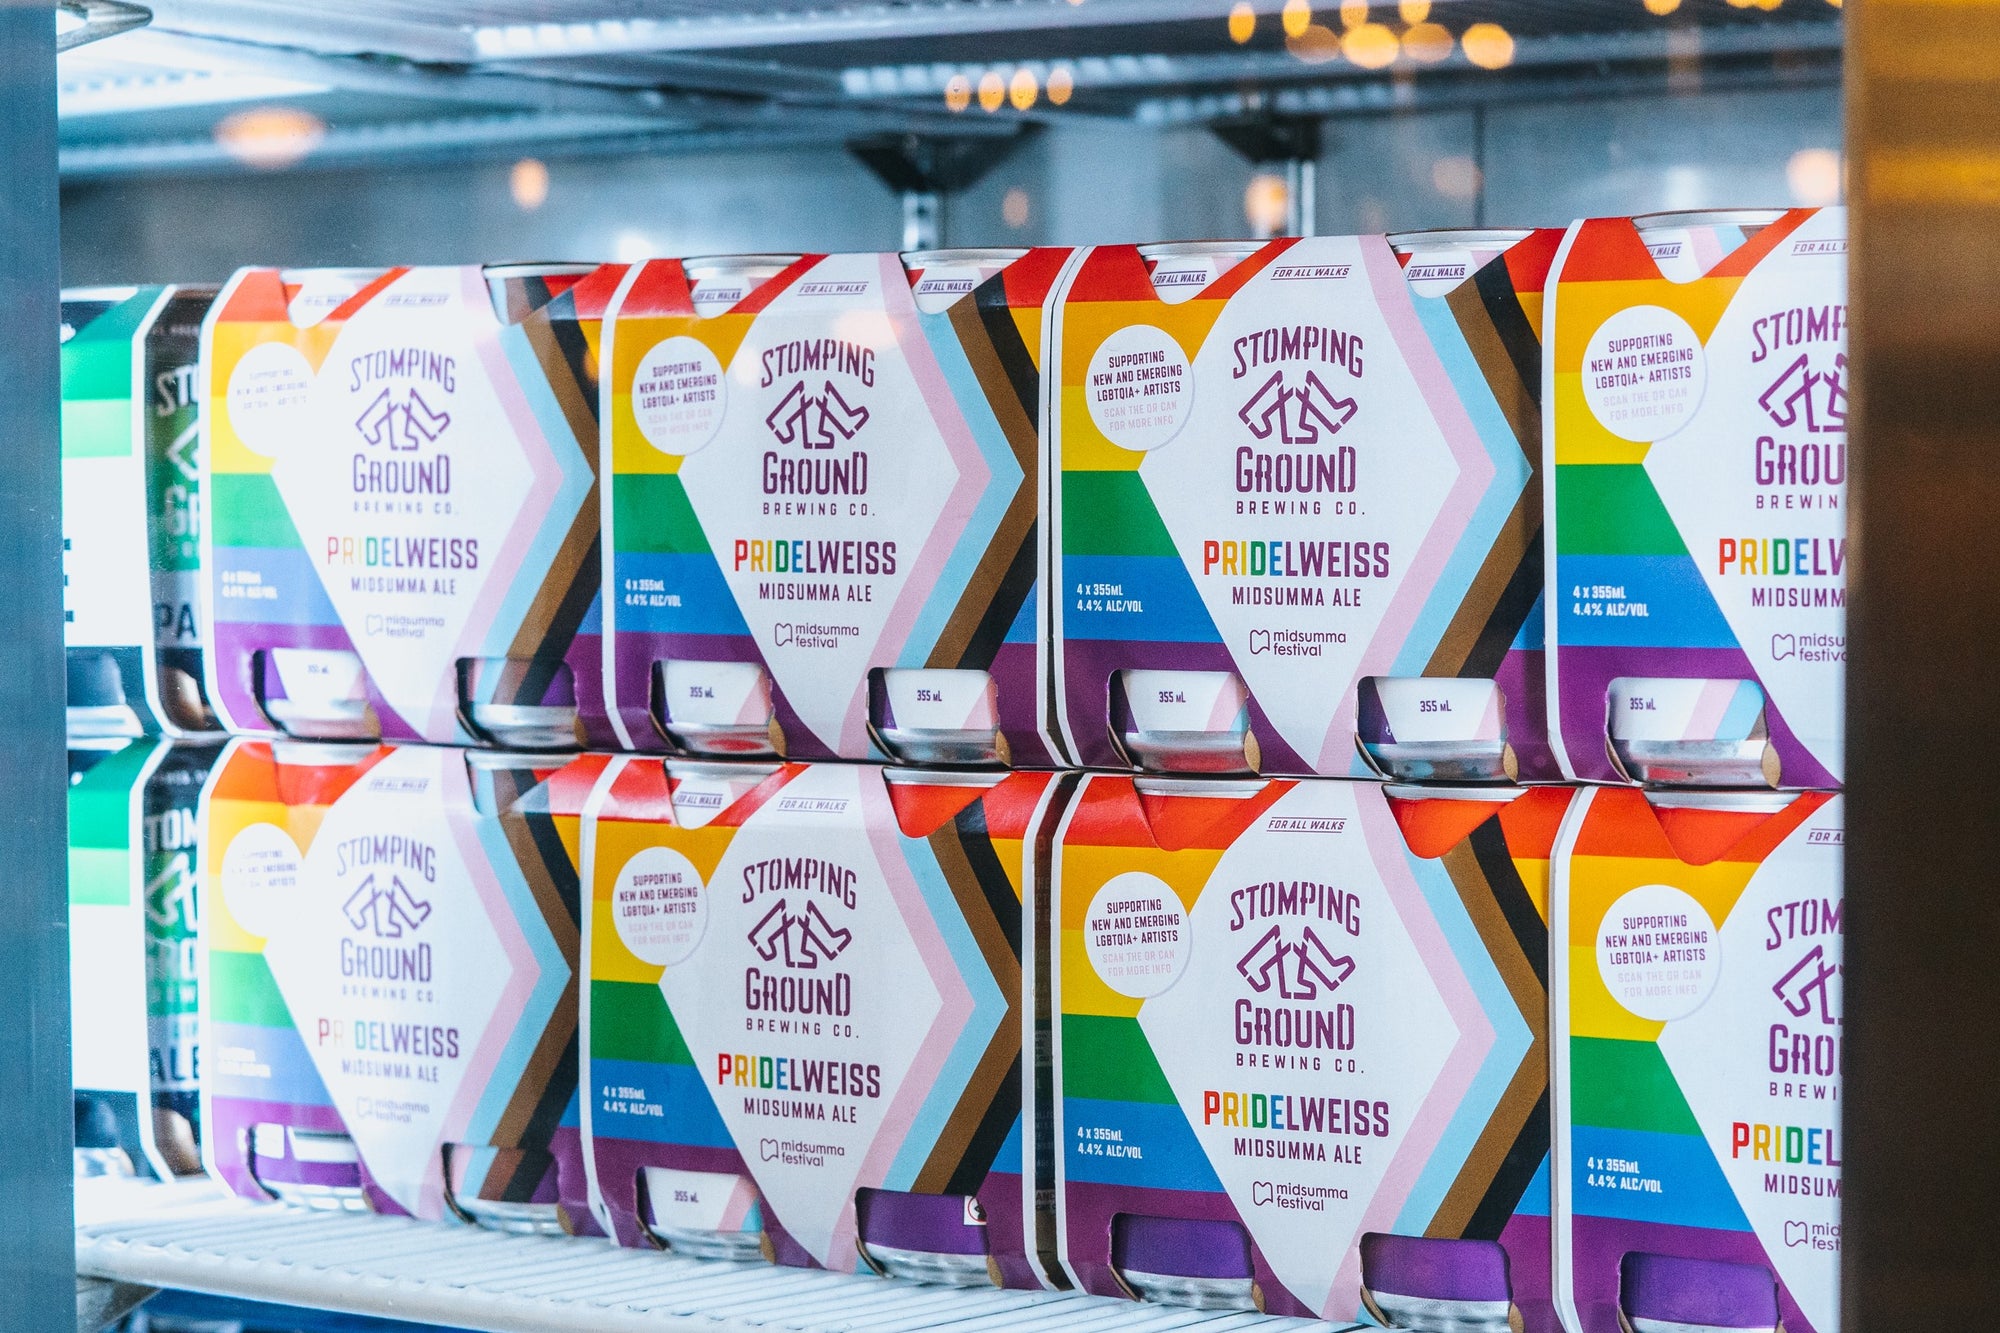 PRIDElweiss Midsumma Ale is back! Serve with PRIDE